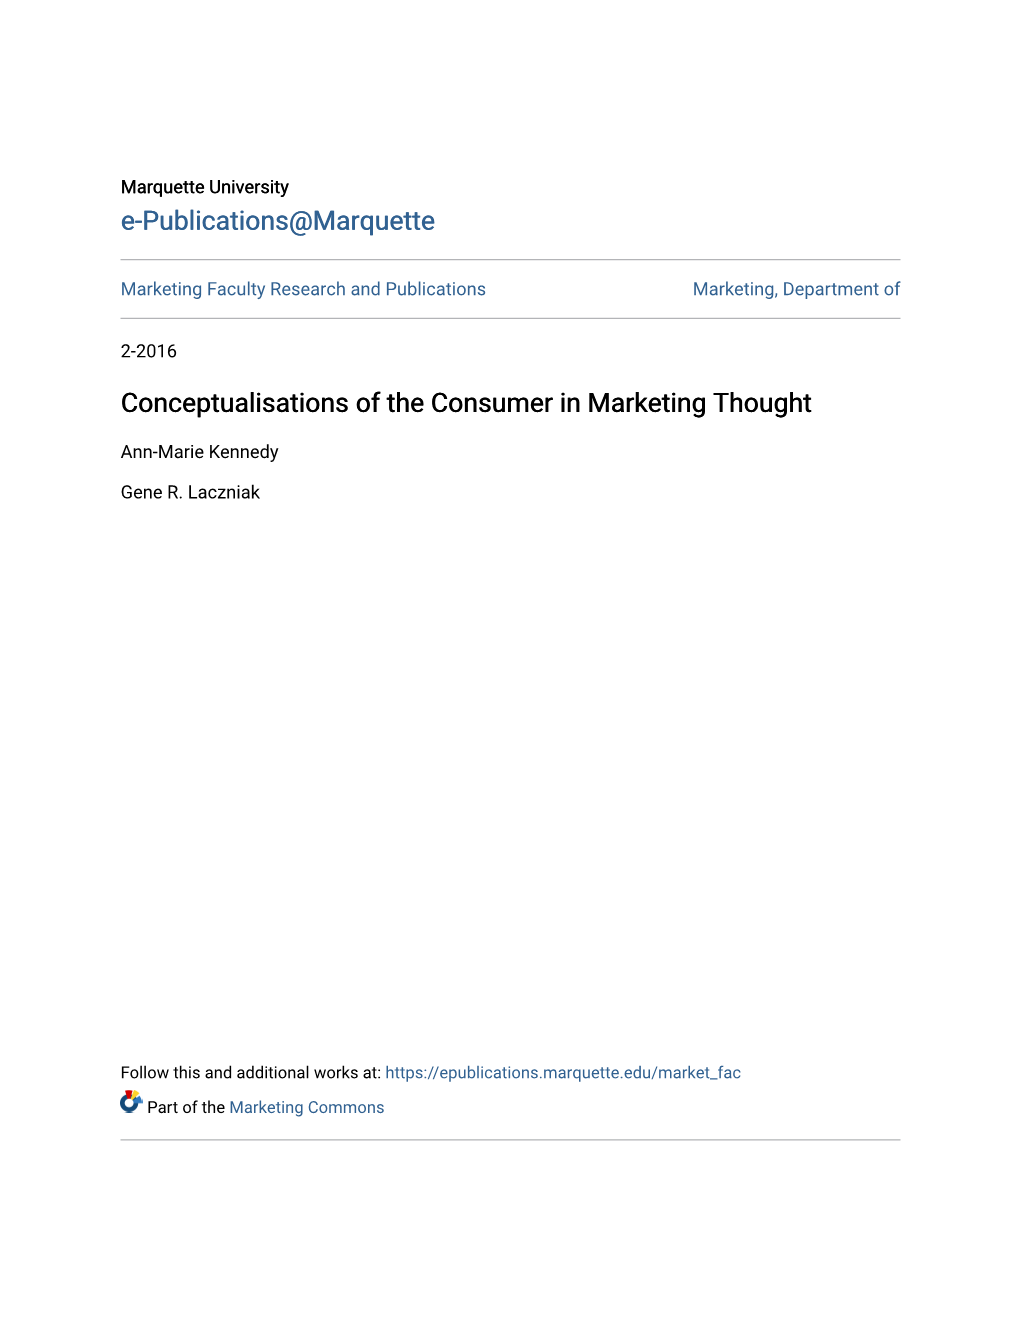 Conceptualisations of the Consumer in Marketing Thought